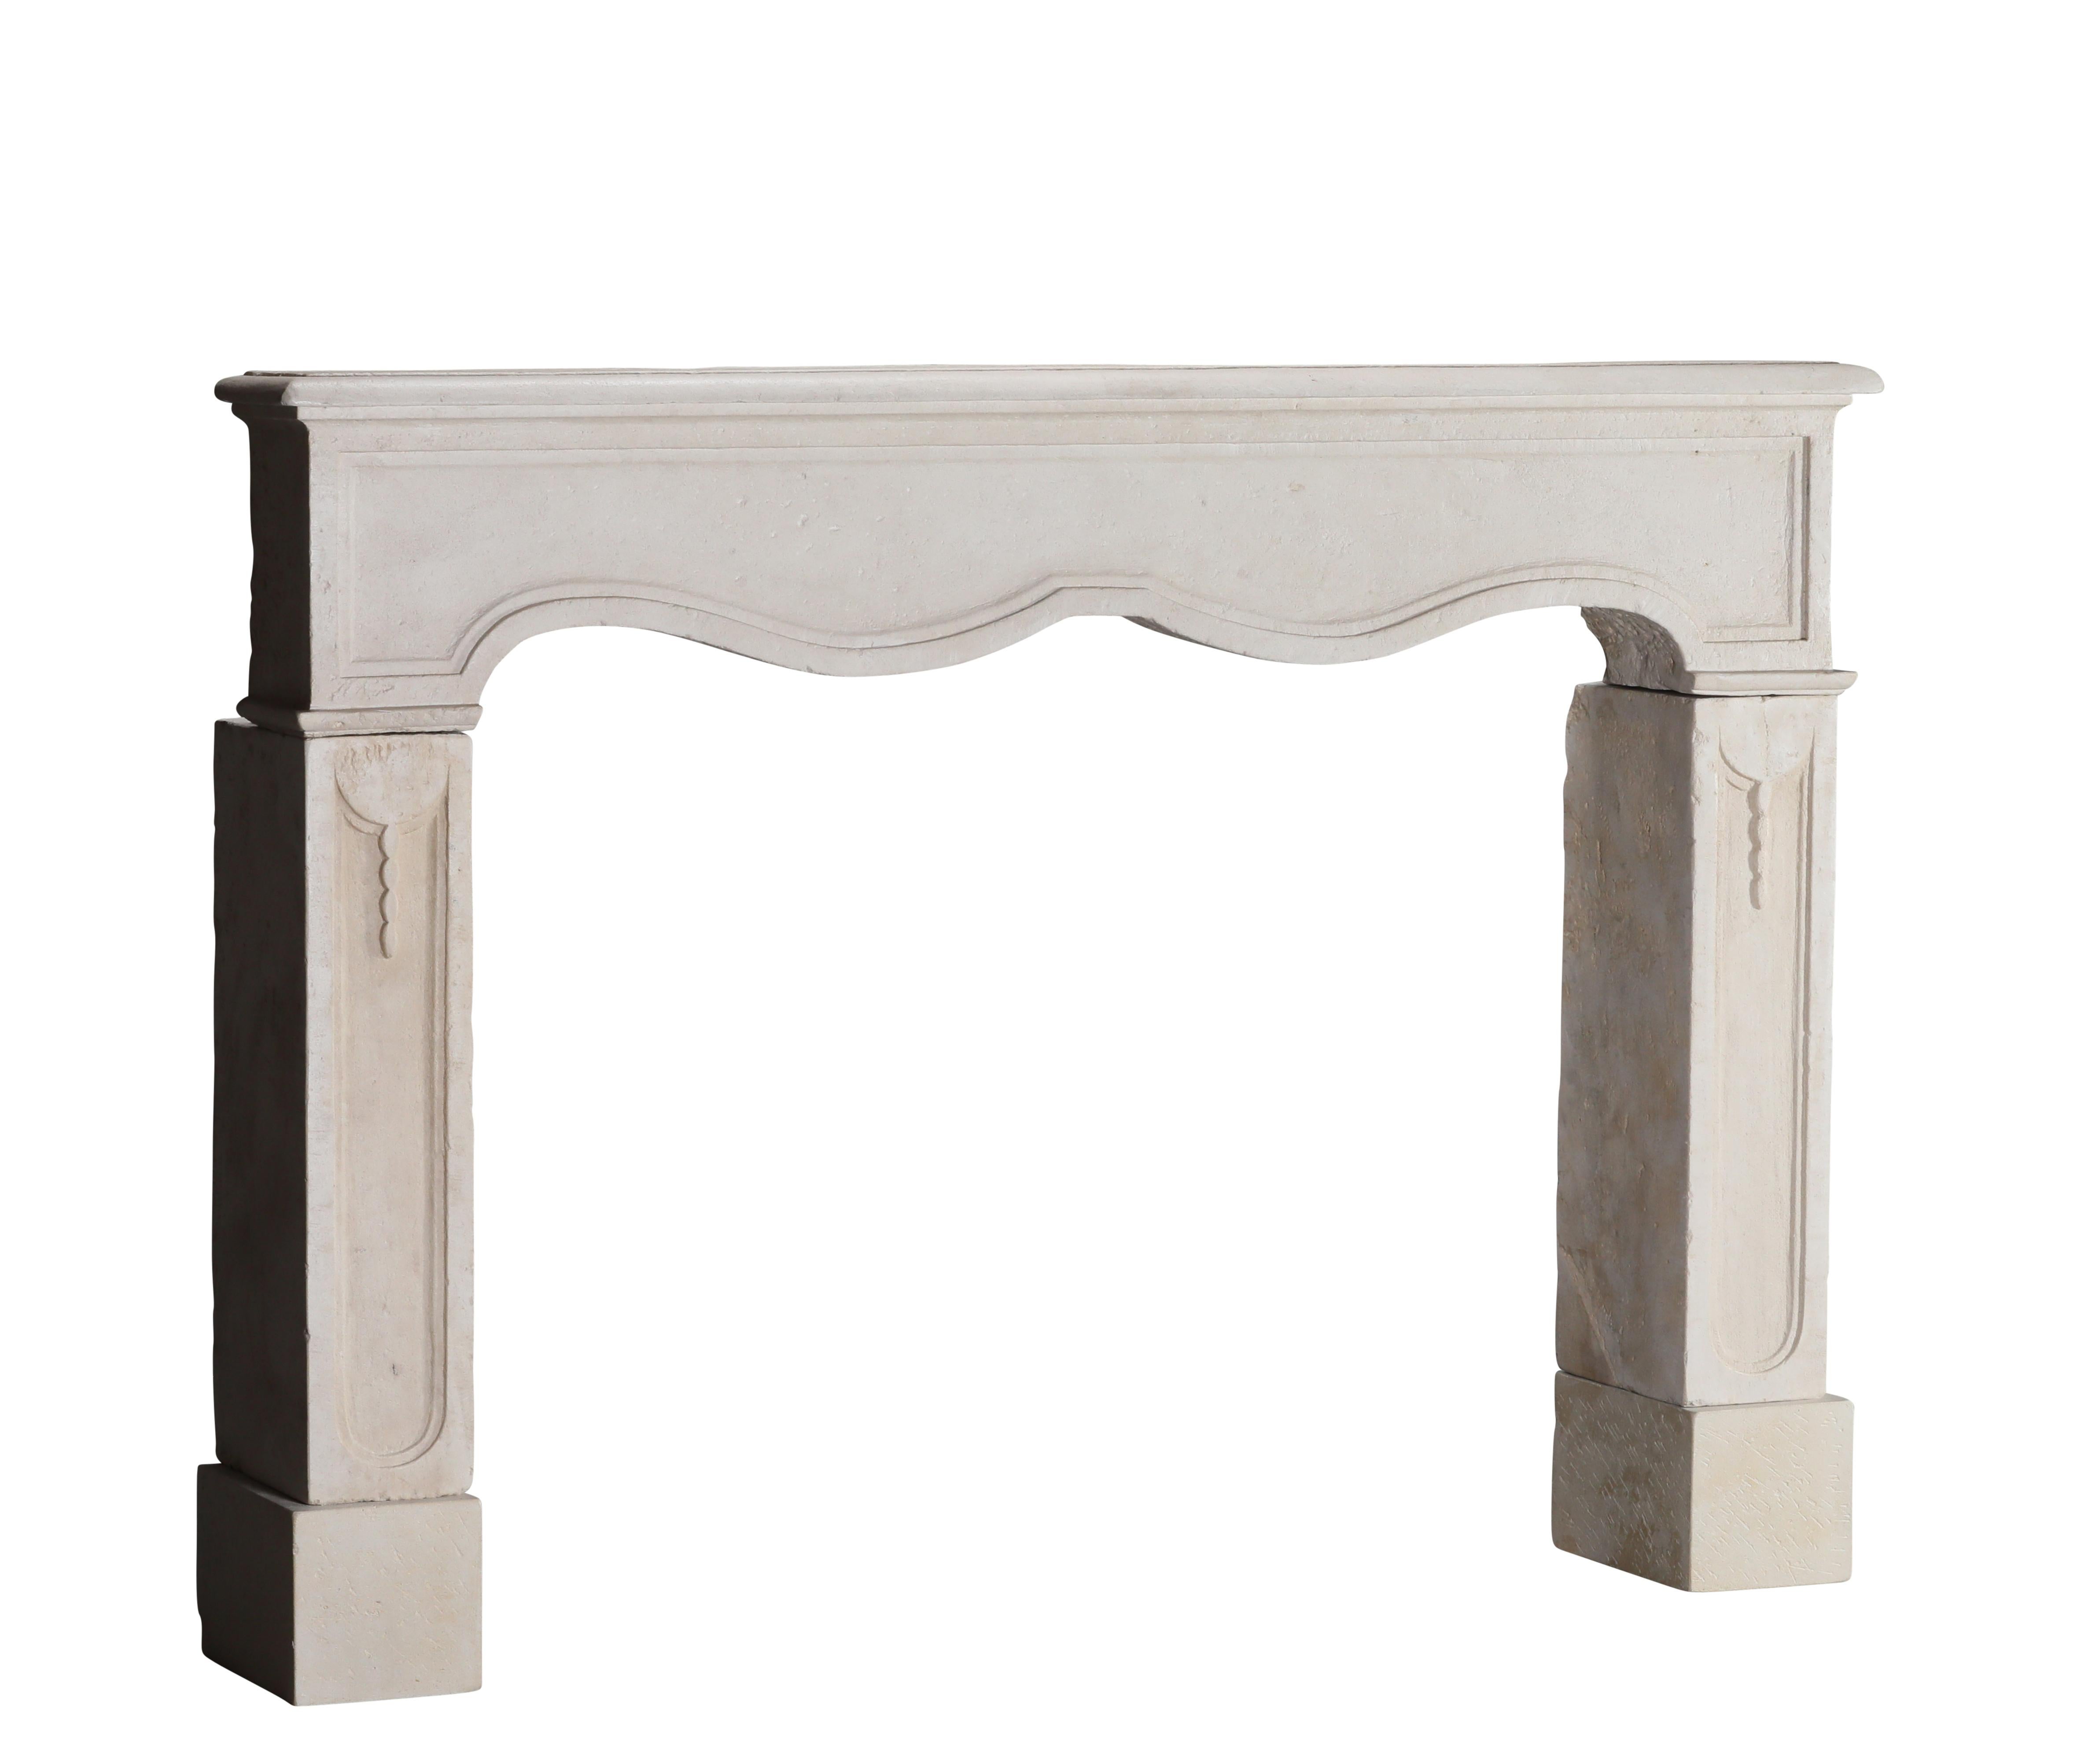 Reclaimed French Light Stone Fireplace In Timeless Louis XIV Style For Sale 2